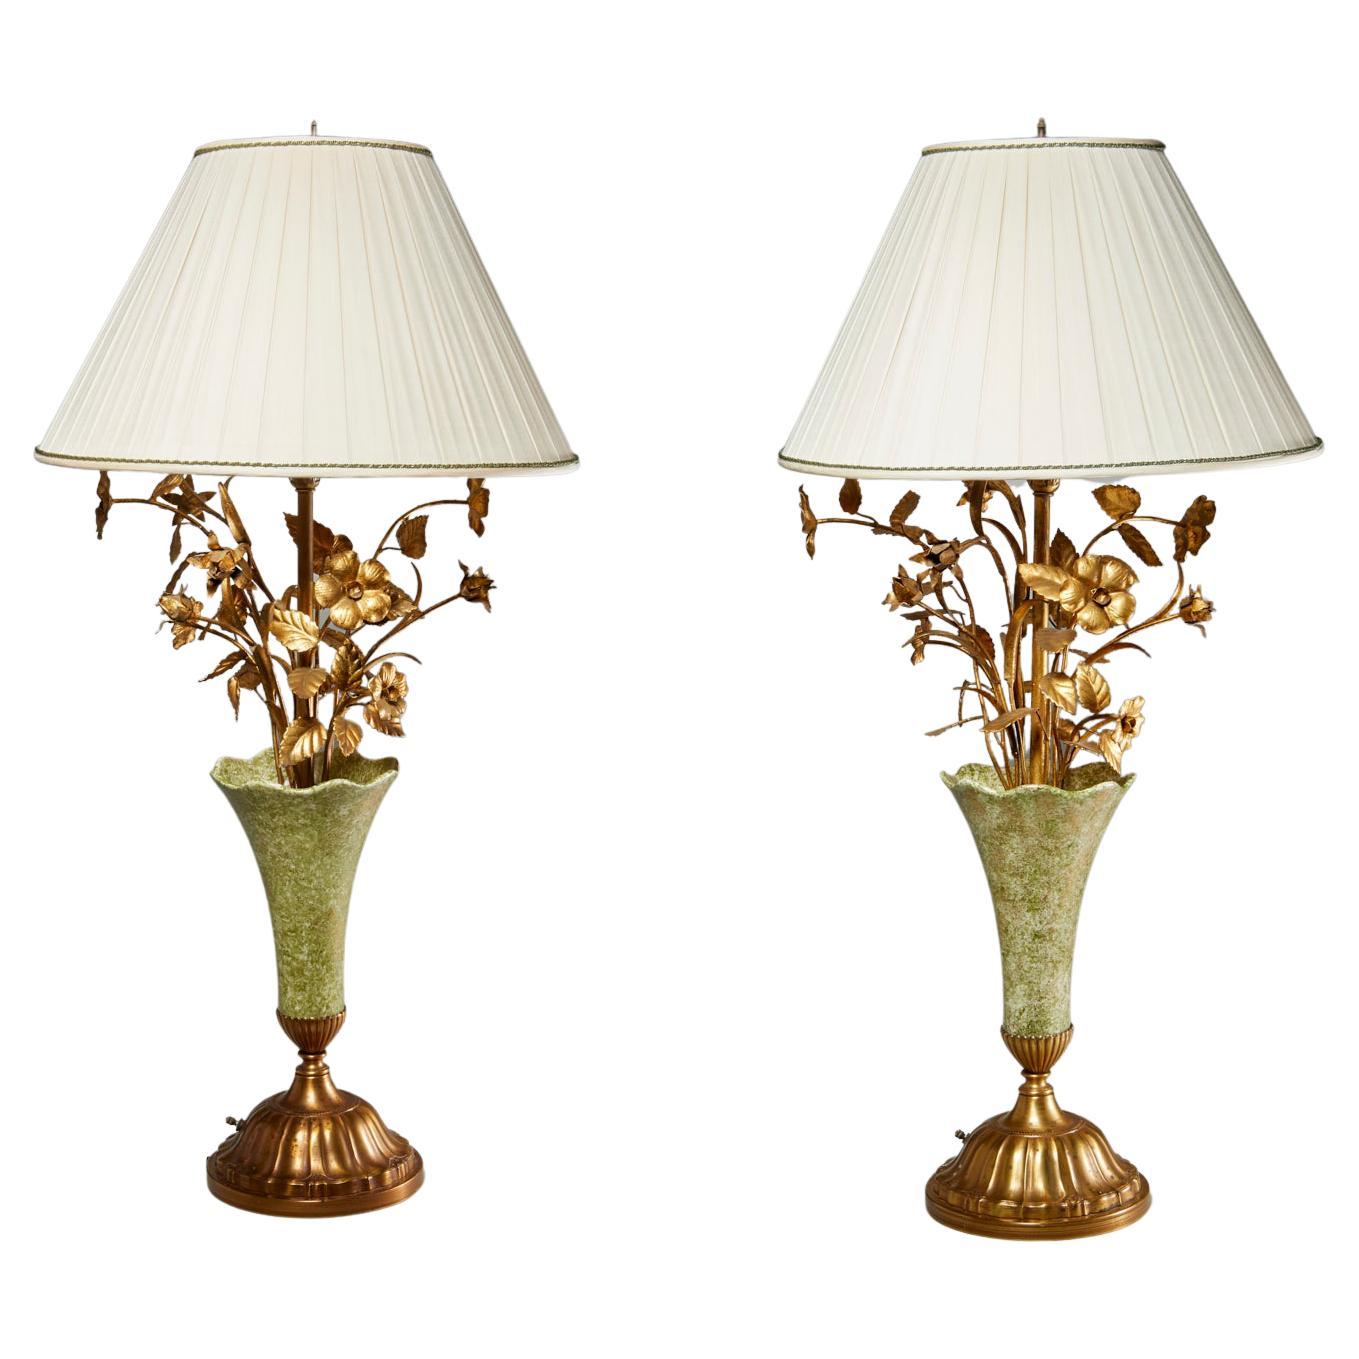 Pair of 1960's Italian Gilt Tole and Ceramic Floral Bouquet Table Lamps For Sale